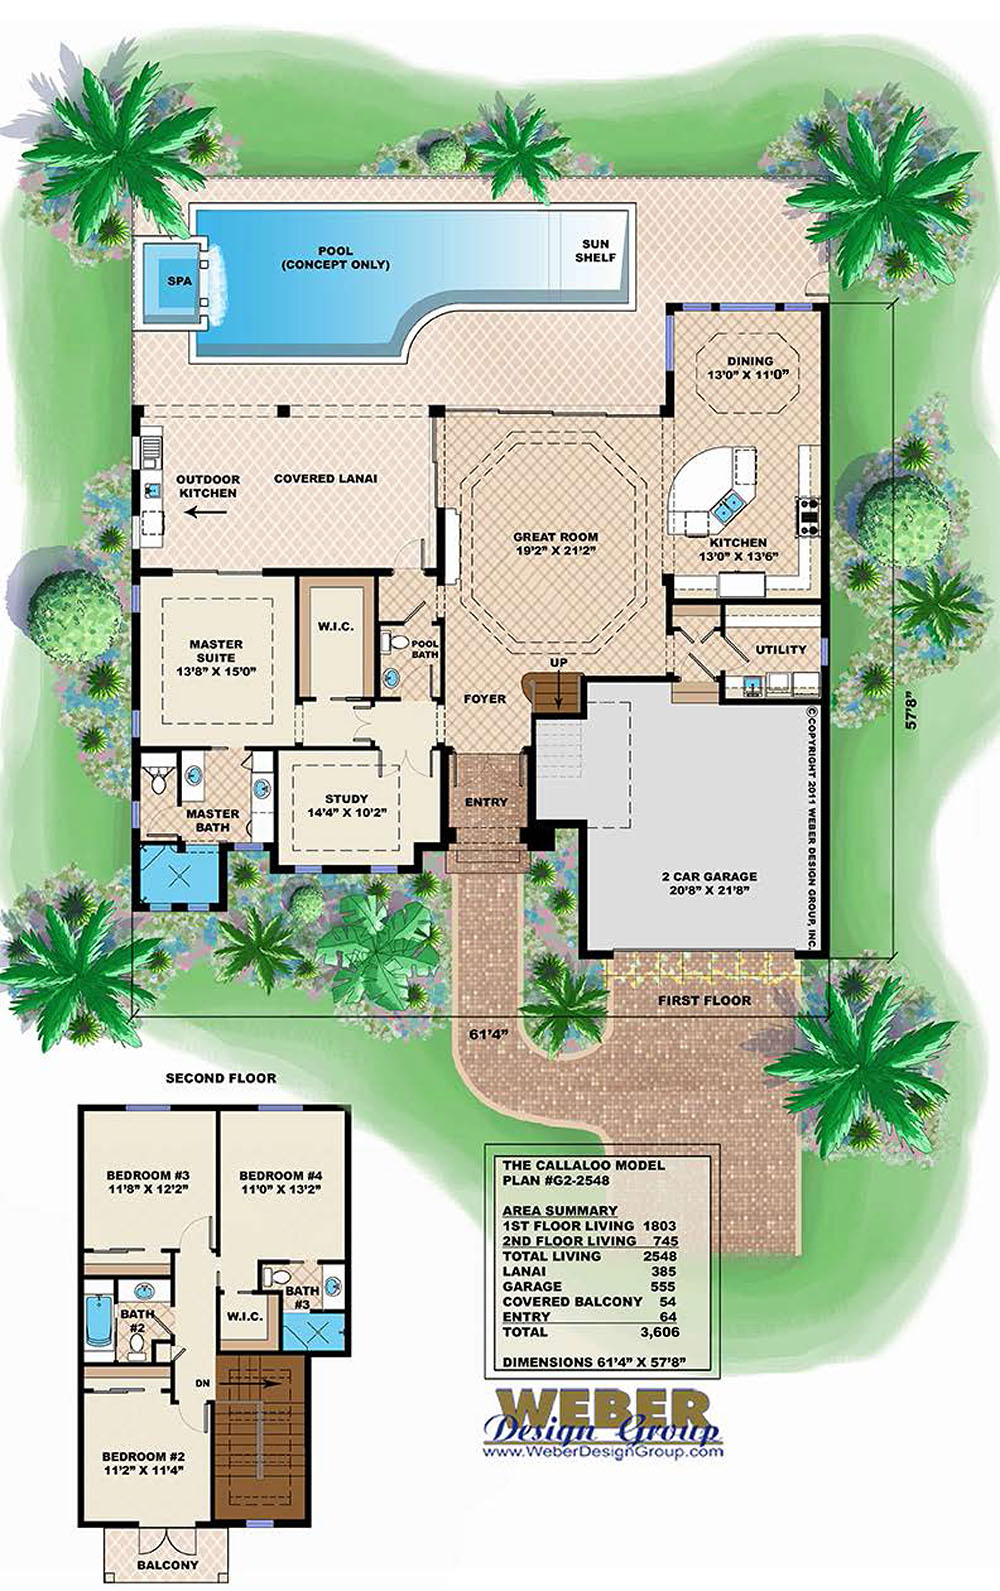 Contemporary House Plans Modern